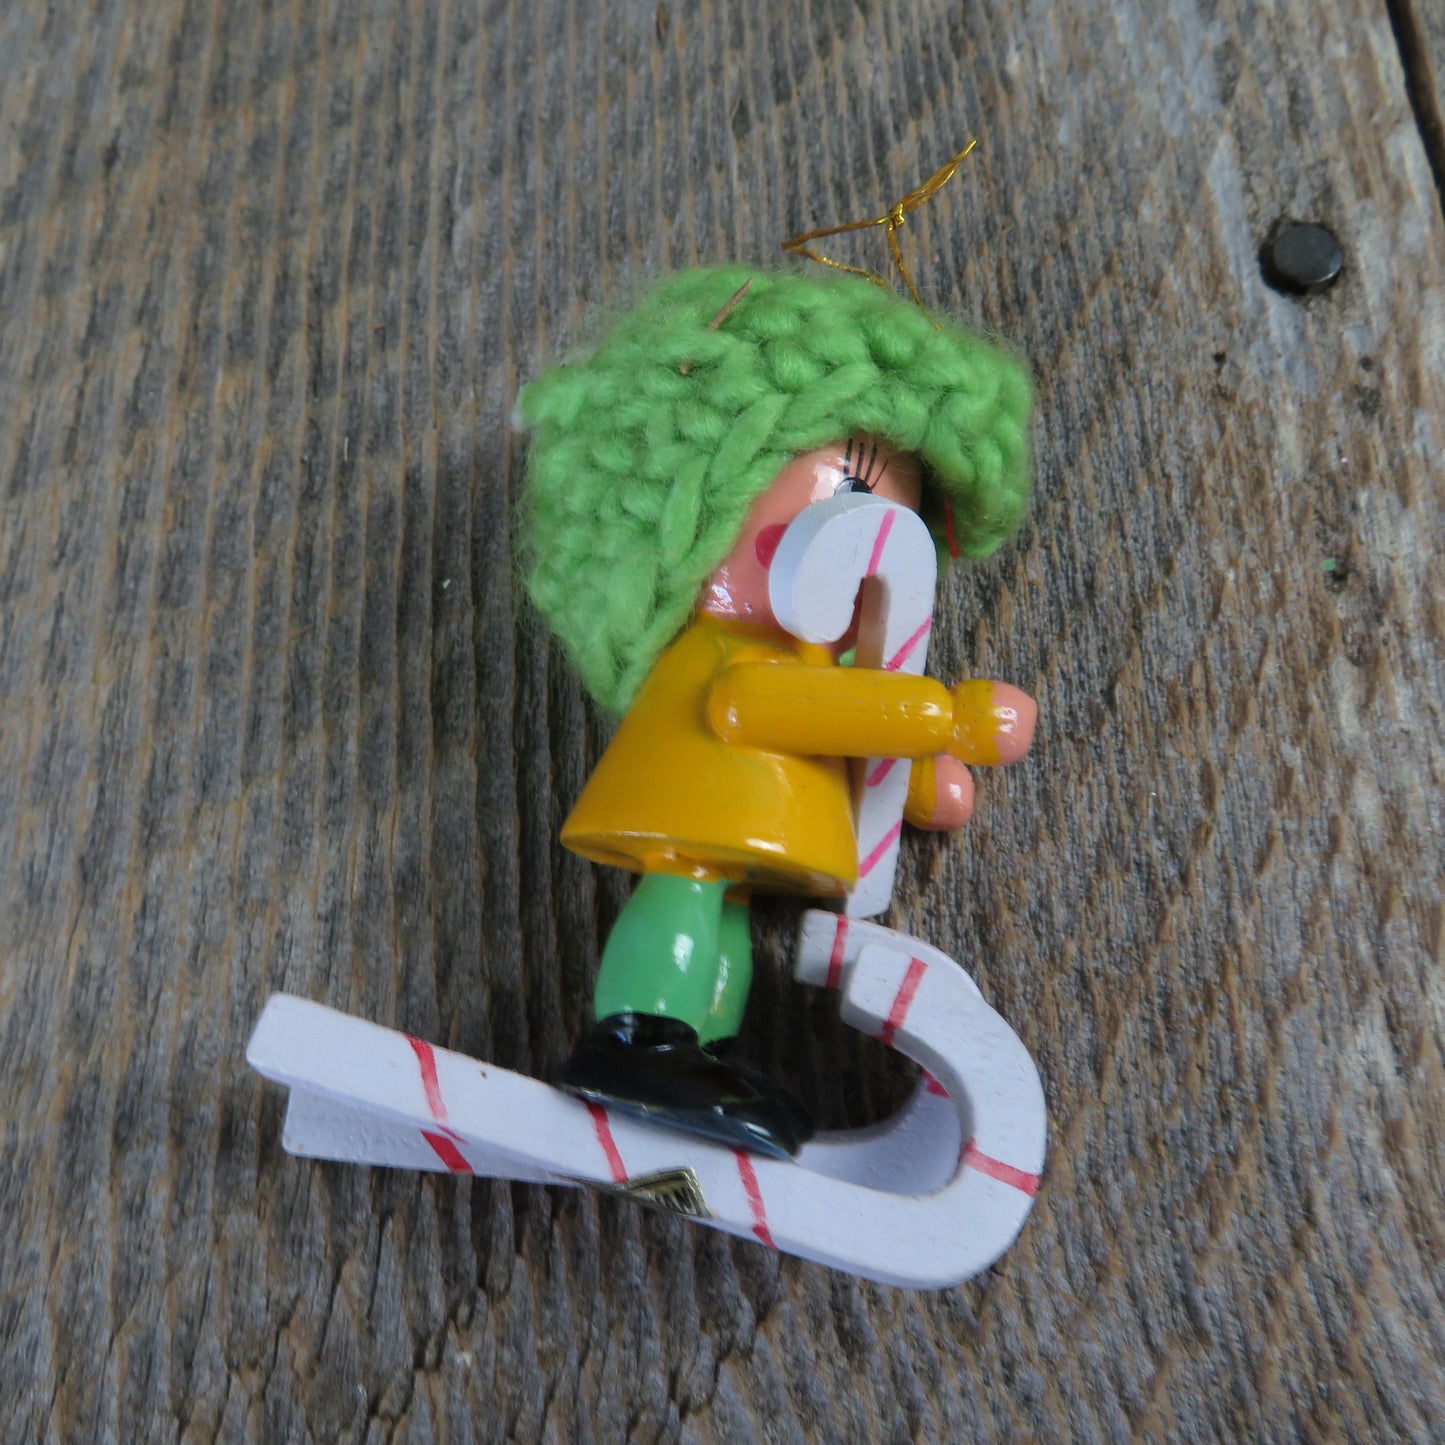 Vintage Girl Skiing with Candy Cane Ornament Green Knit Hat Yellow Shirt Candy Cane Skis